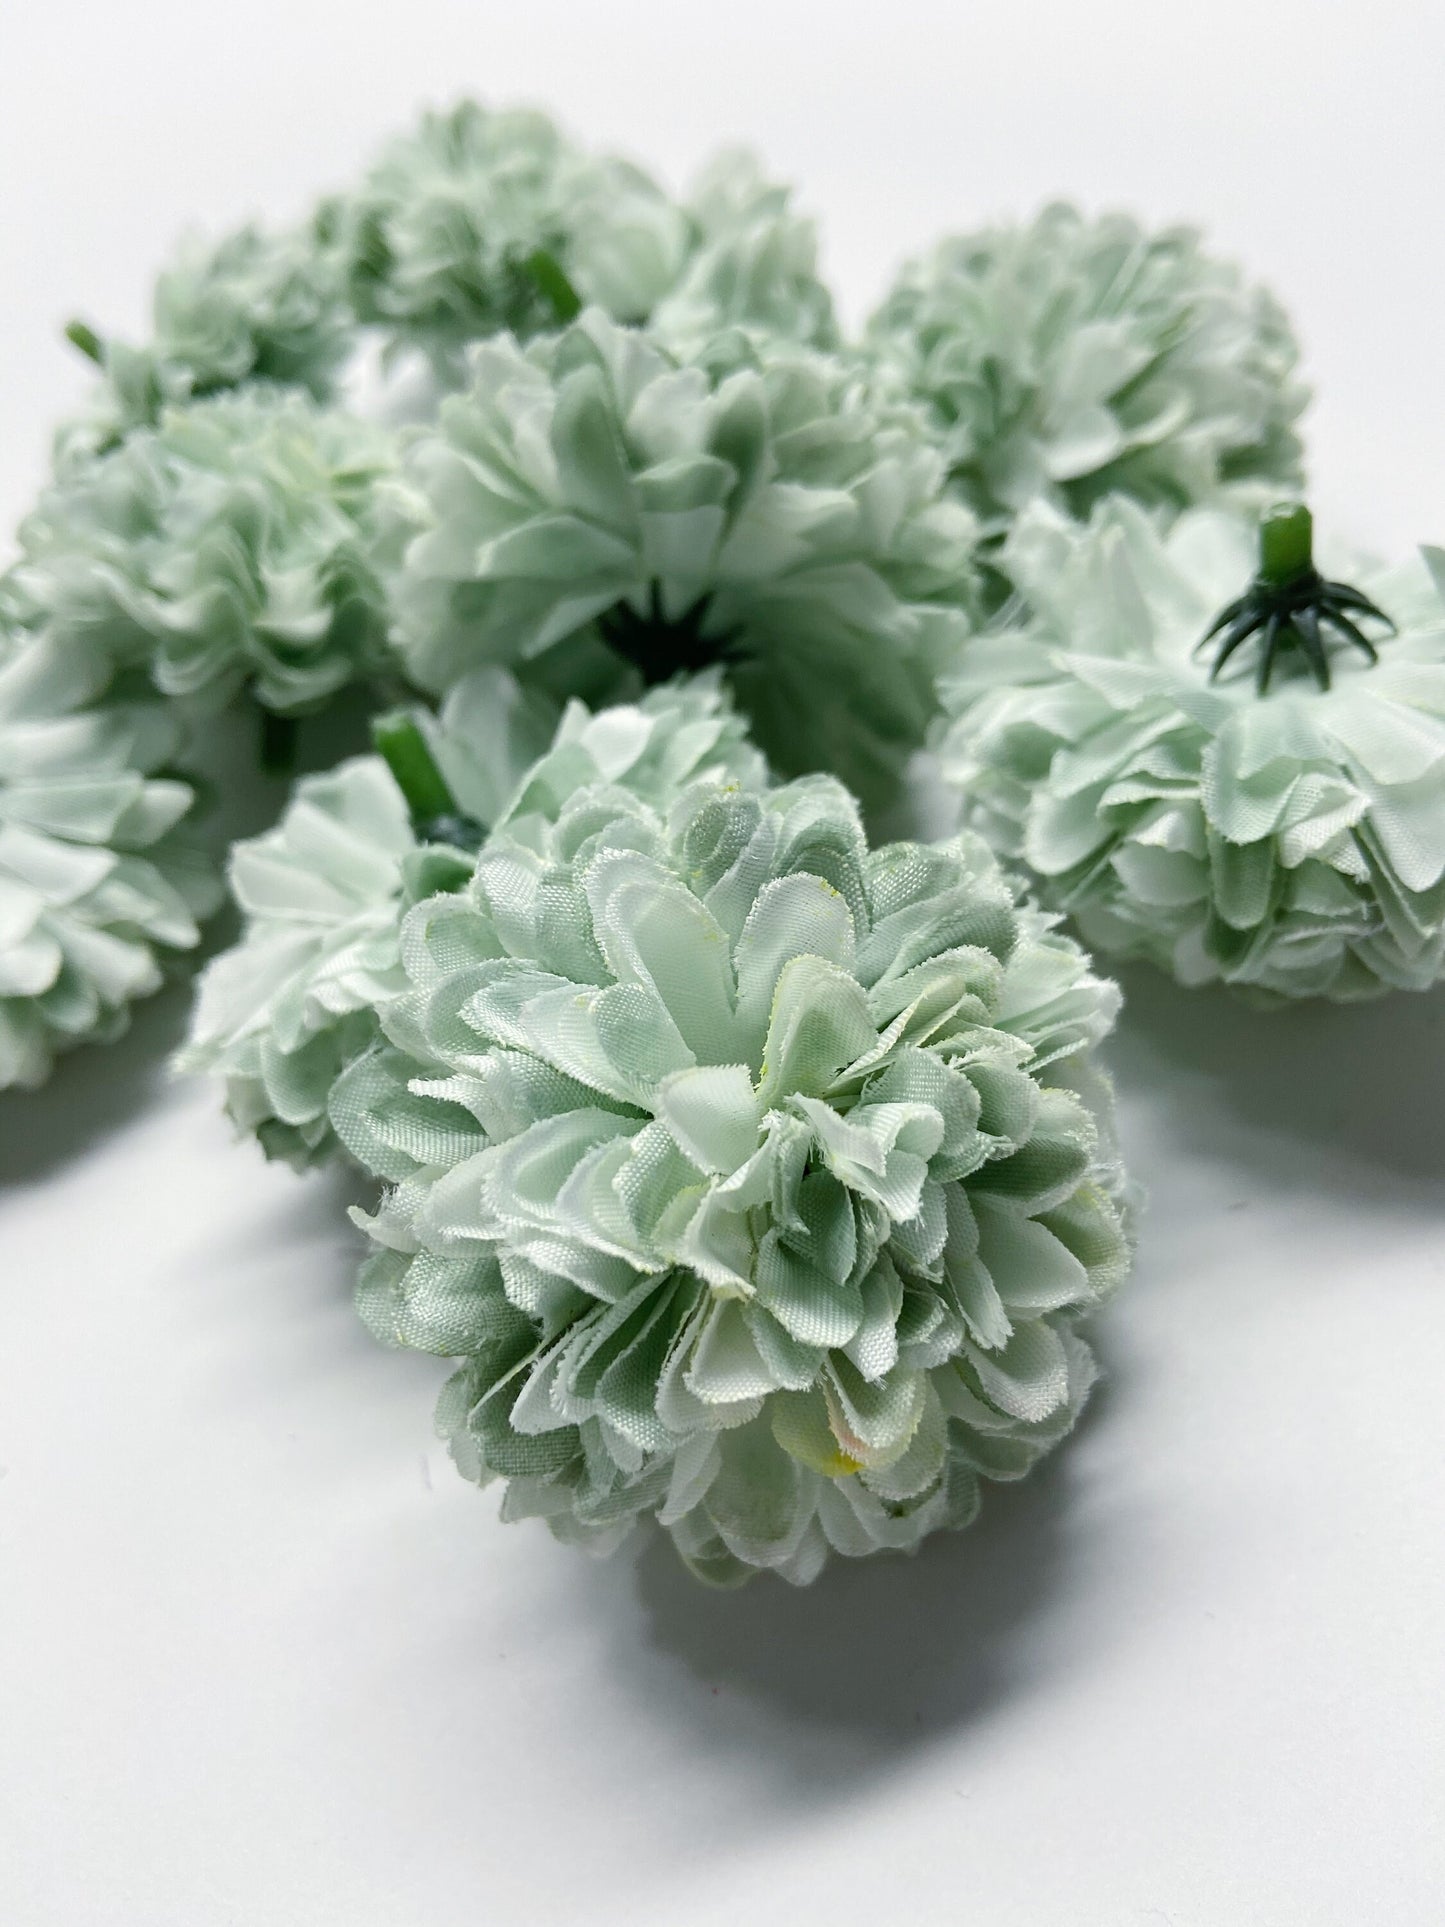 10 Faux Flowers, Fake Flowers, Spring Color, Green, Flower heads, Flowers, Decoration, Home decor, Wedding Details, Arts and Craft